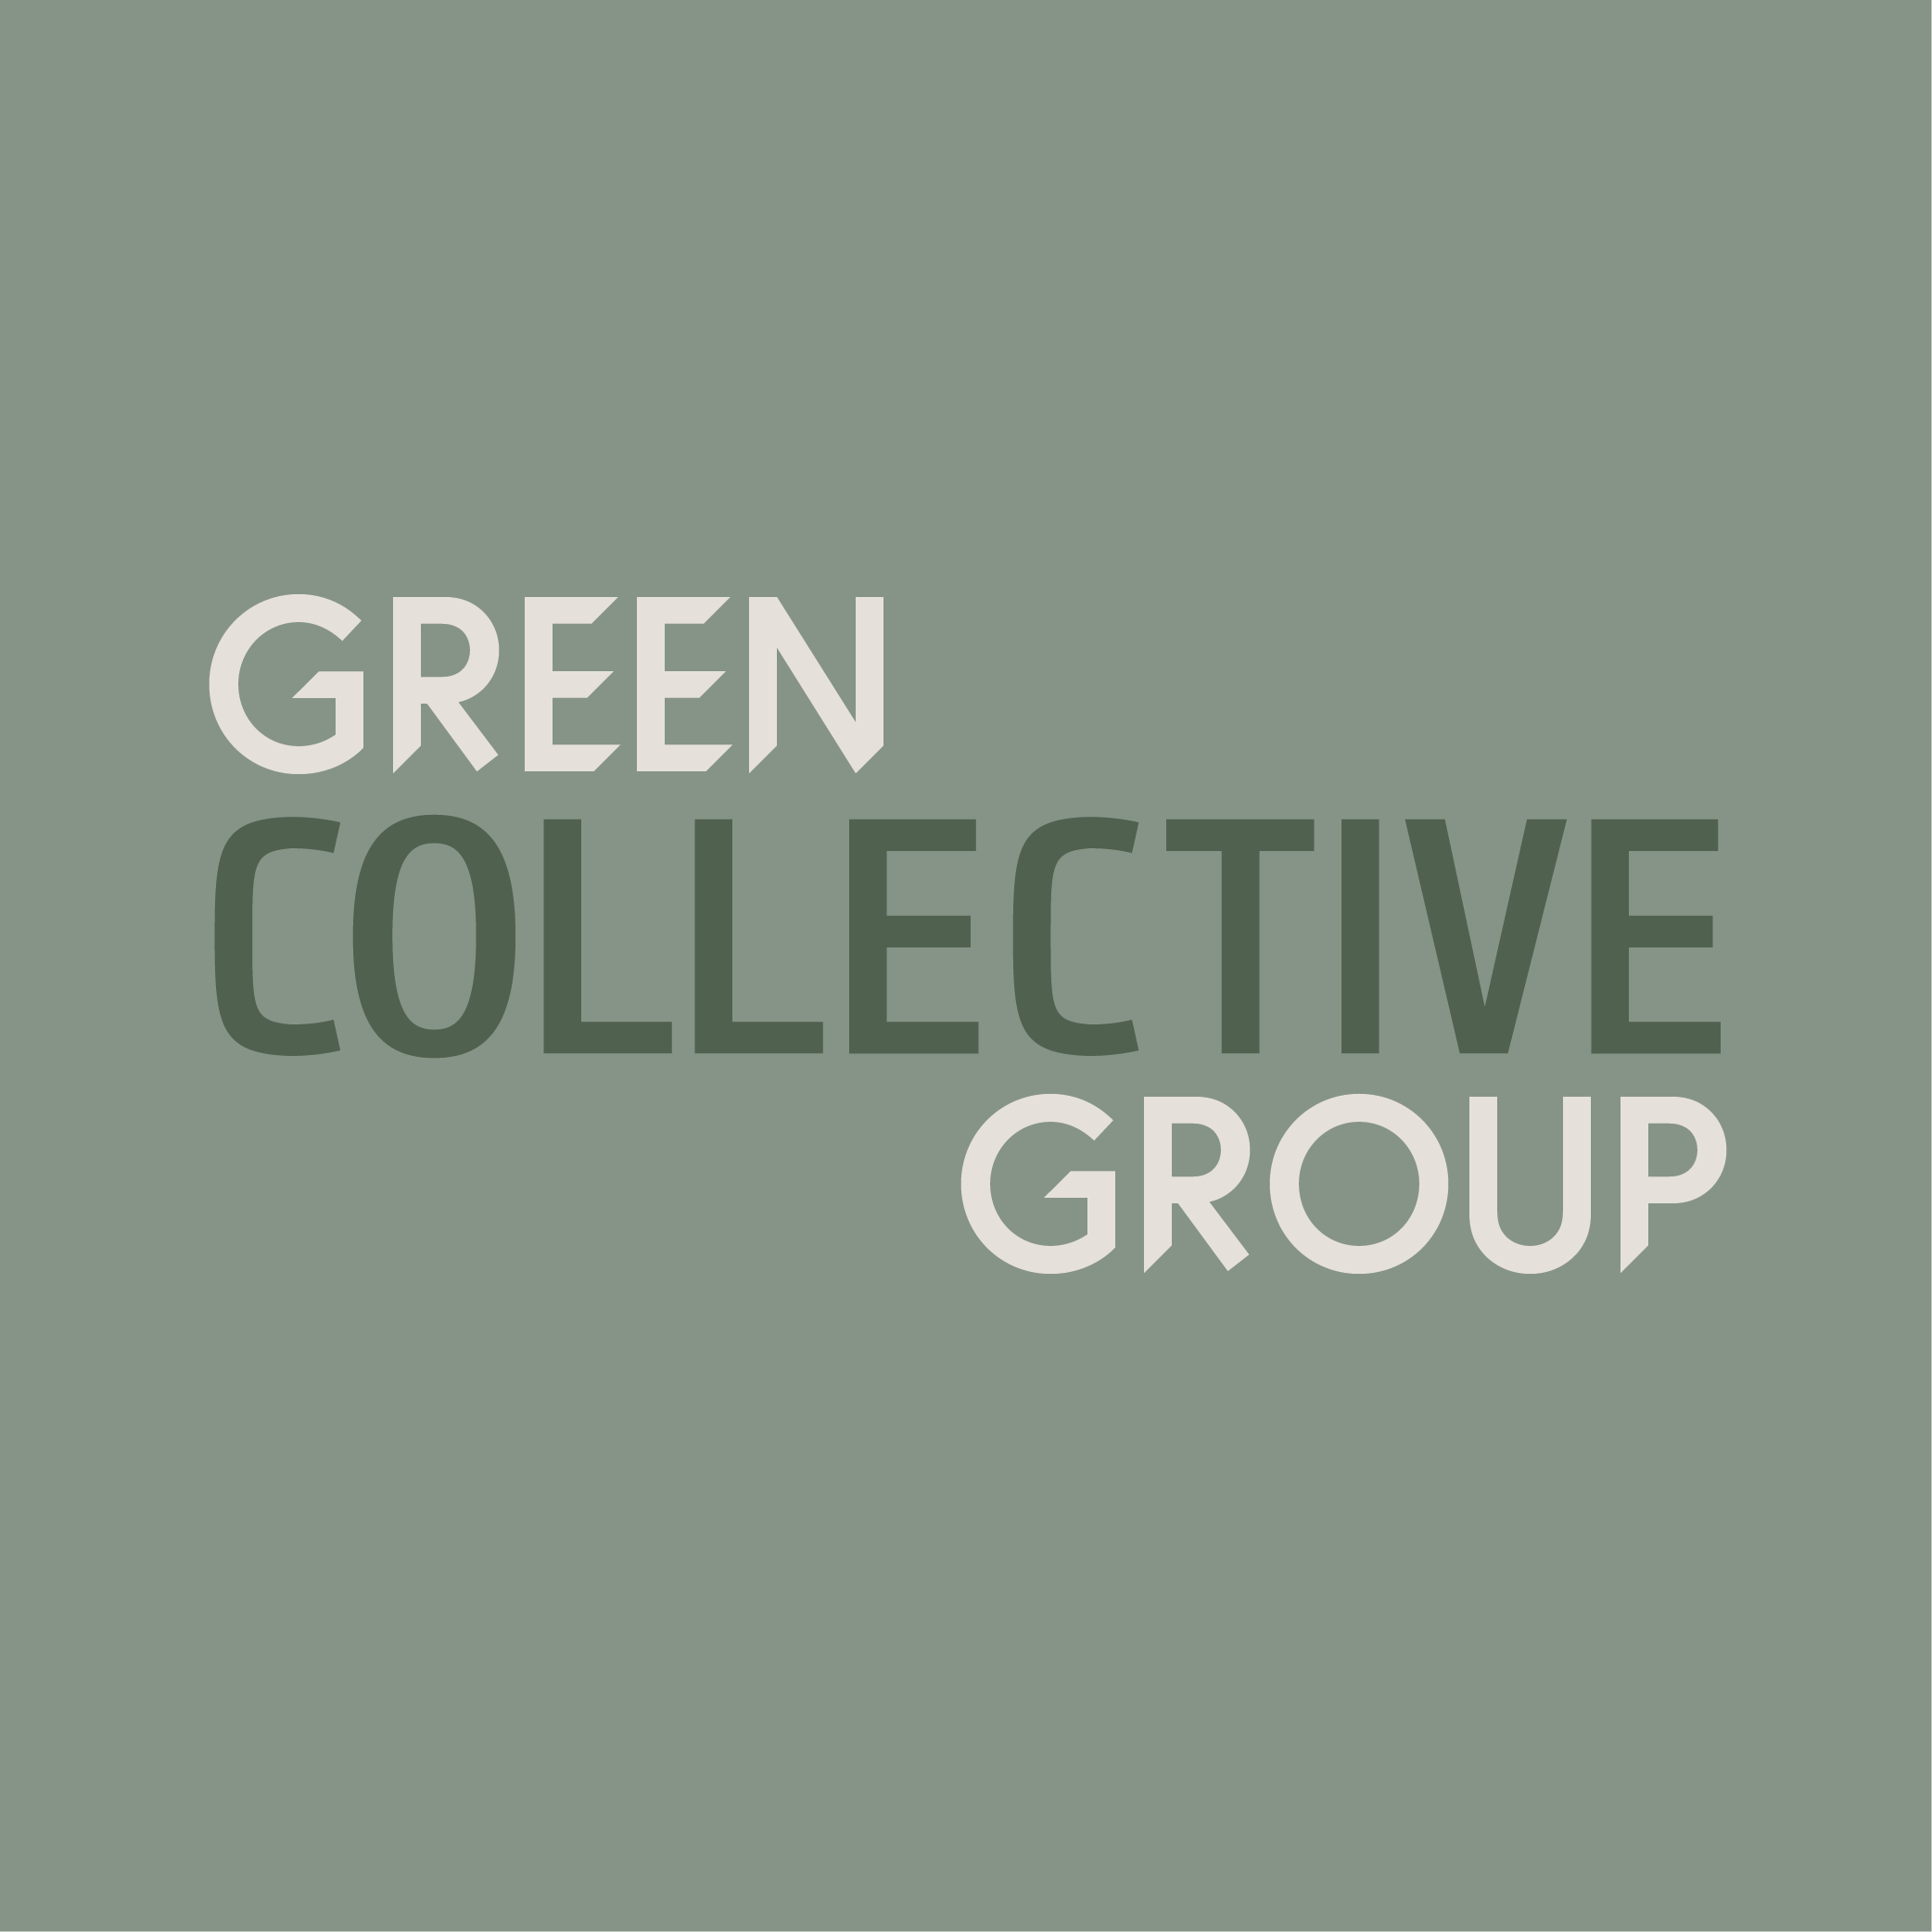 Green Collective Group